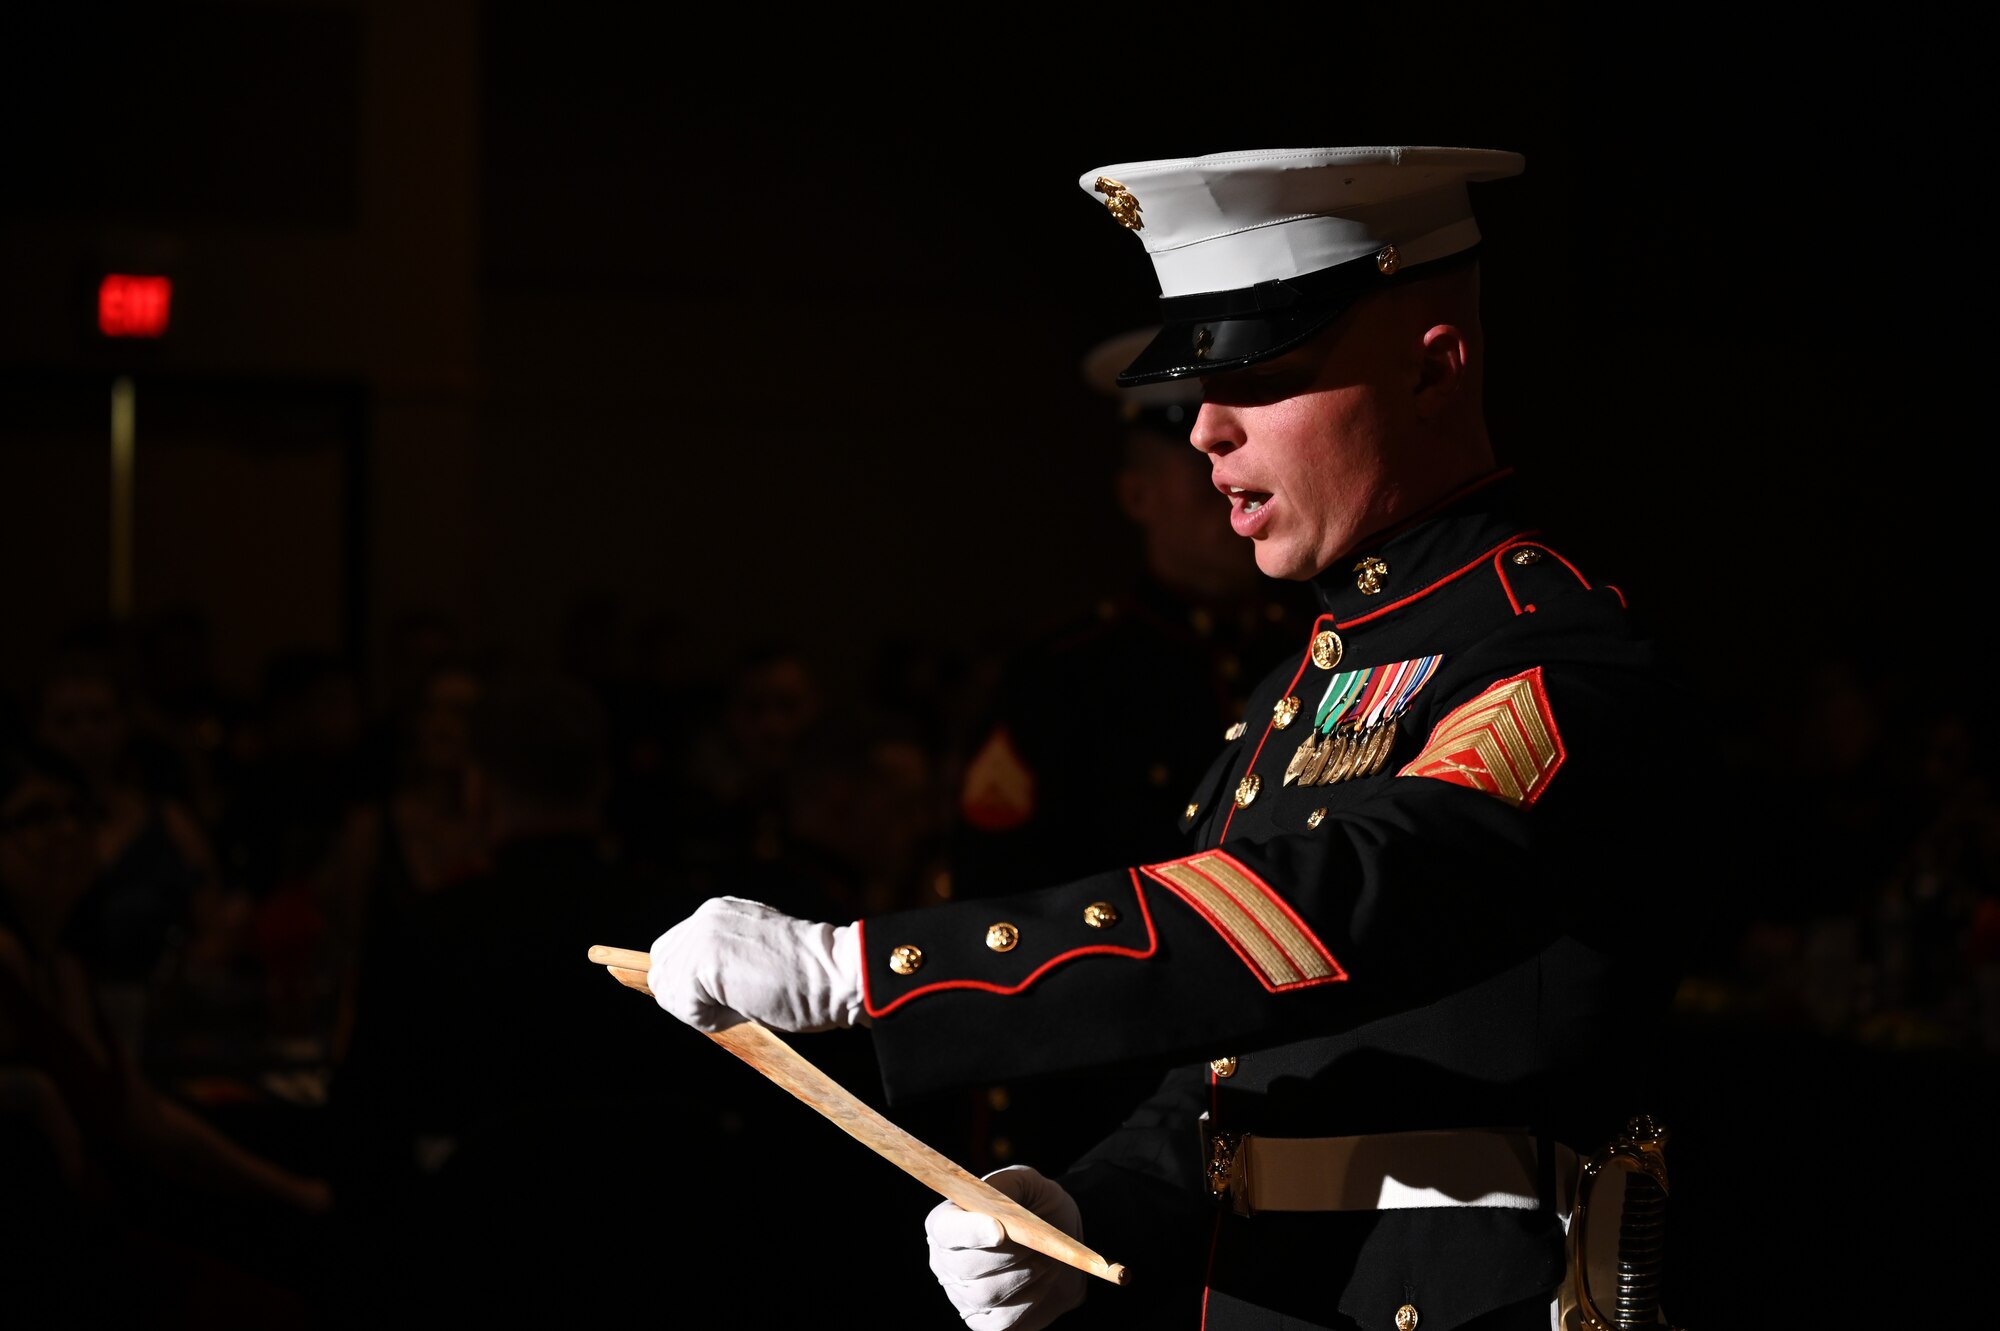 U.S. Marine Corps Staff Sgt. Isaac Norman Ross, Marine Corps Detachment Goodfellow instructor, reads the 13th Marine Corps commandant's birthday message during the Marine Corps Ball held at the McNease Convention Center, San Angelo, Texas, Nov. 4, 2022. Marines came together to celebrate the 247th birthday of the USMC. (U.S. Air Force photo by Senior Airman Michael Bowman)